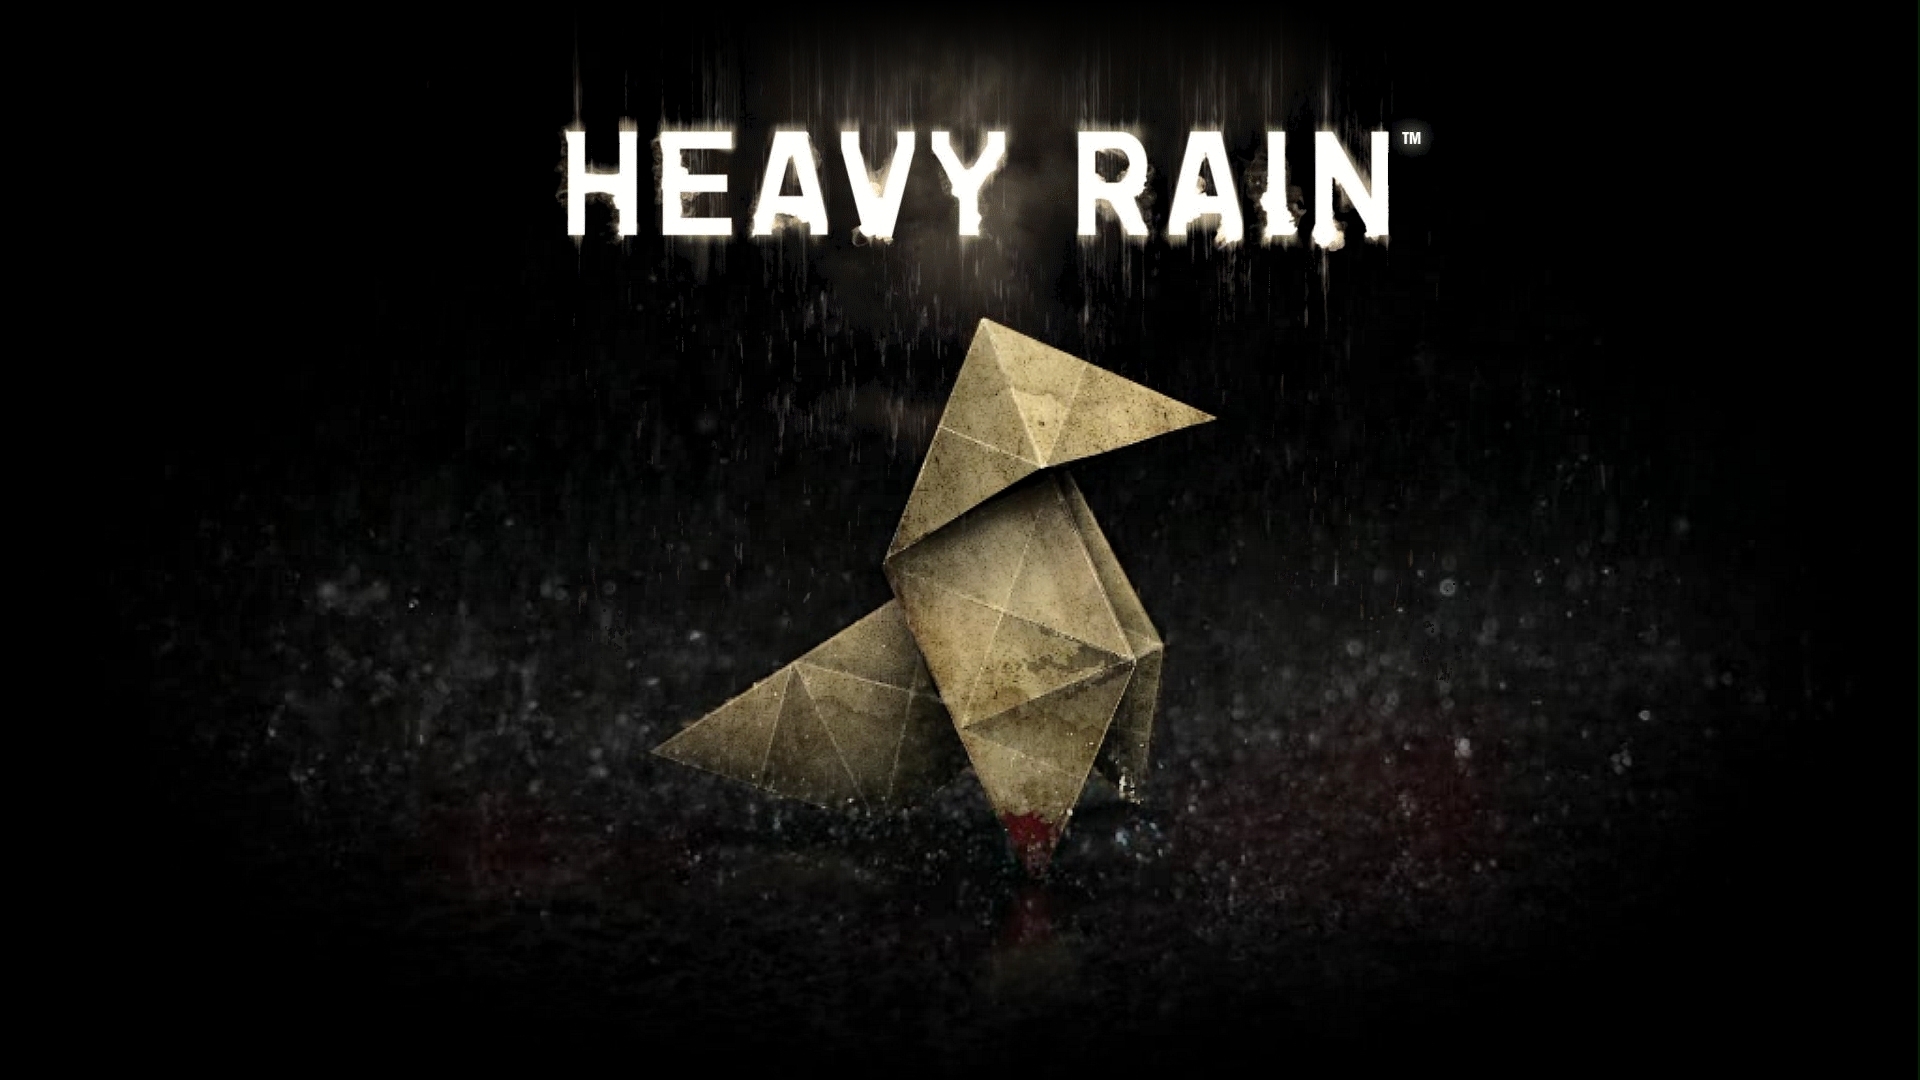 Heavy Rain The game wallpapers and images   wallpapers